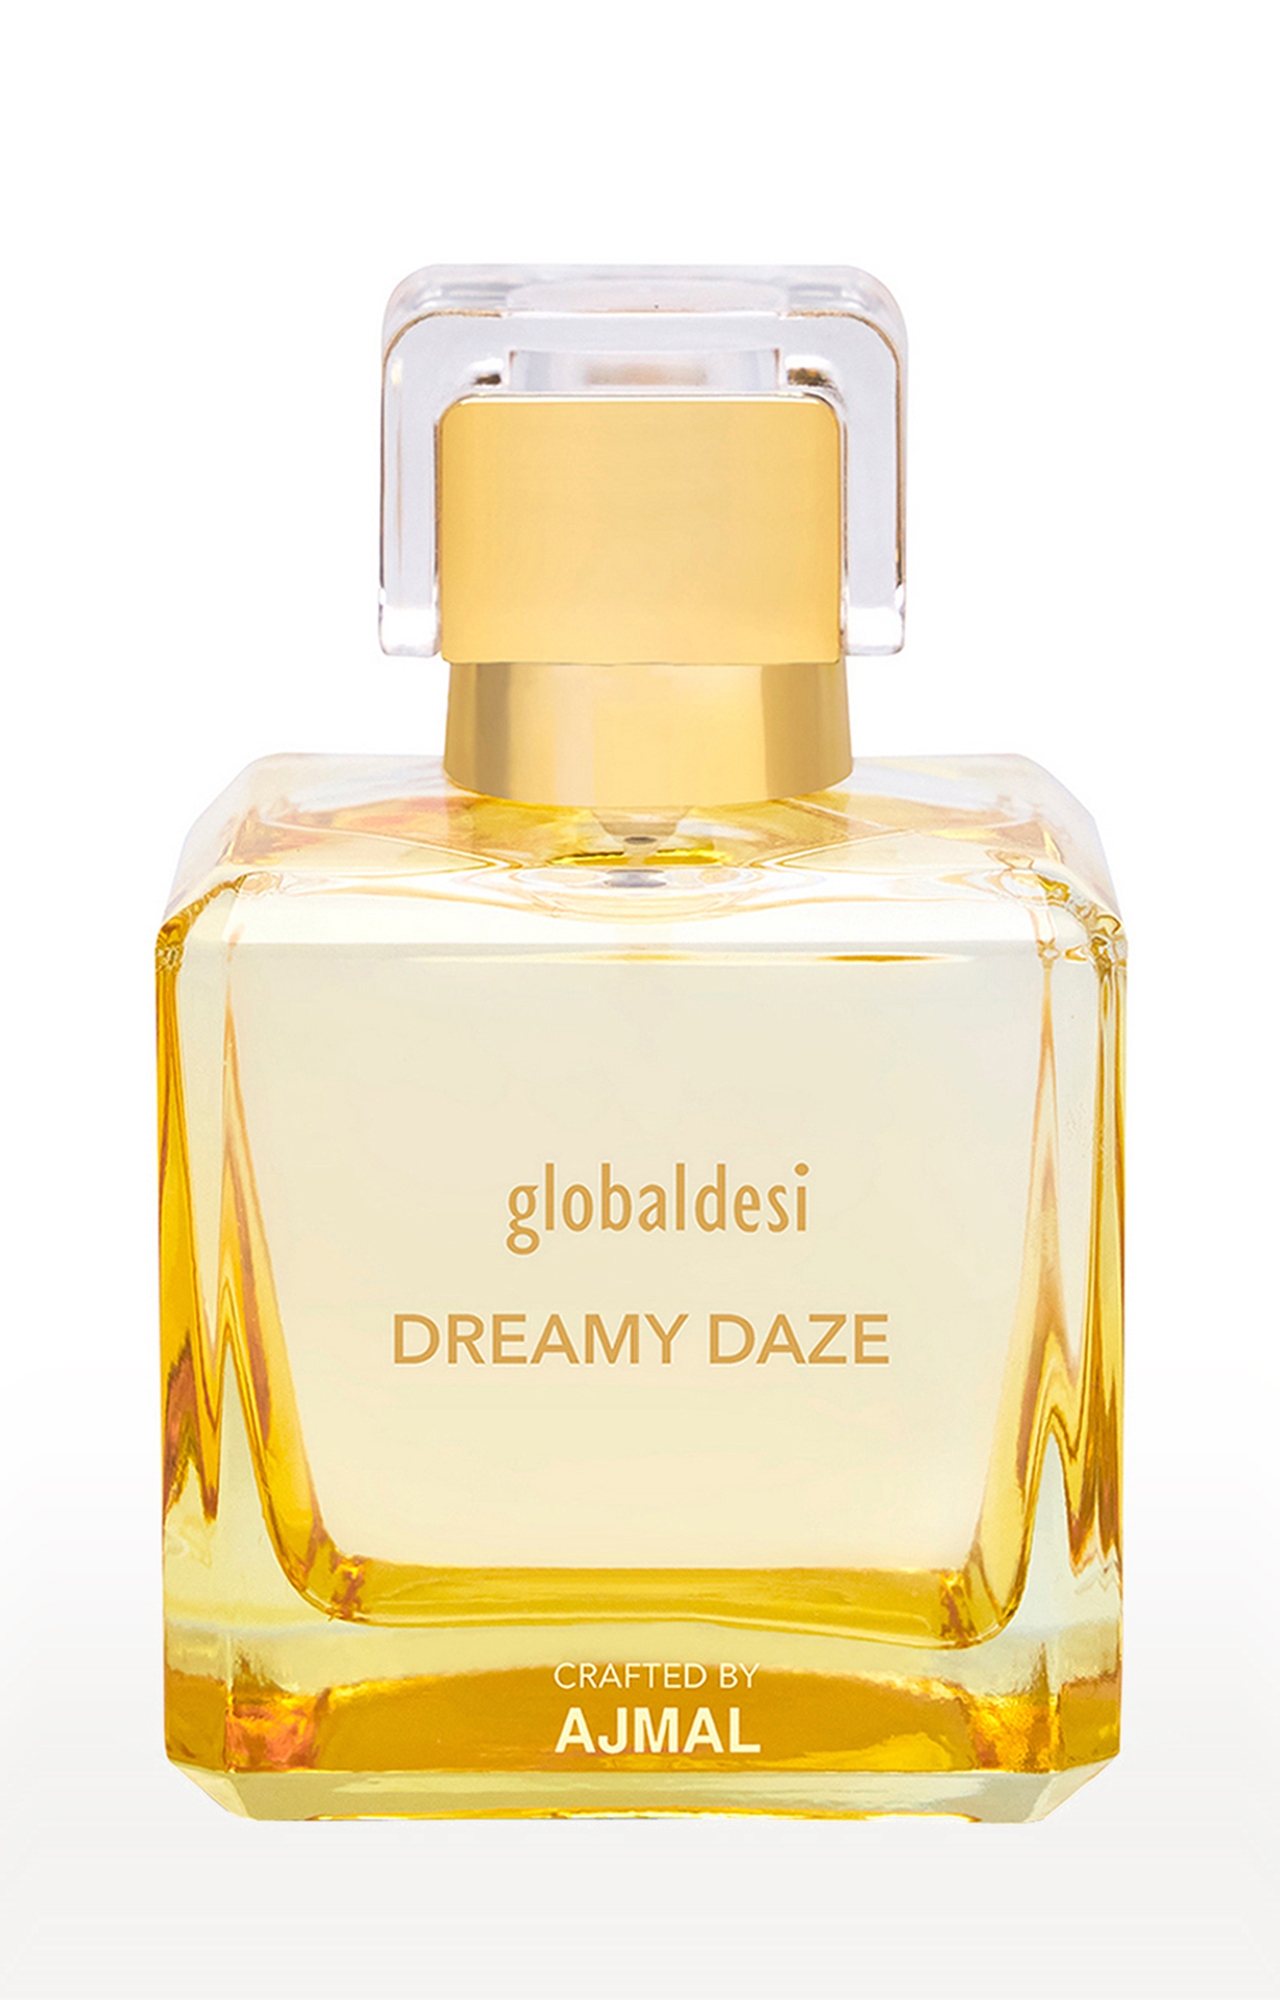 Global Desi Crafted By Ajmal | Global Desi Dreamy Daze Eau De Parfum 50ML Long Lasting Scent Spray Gift For Women Crafted By Ajmal 1